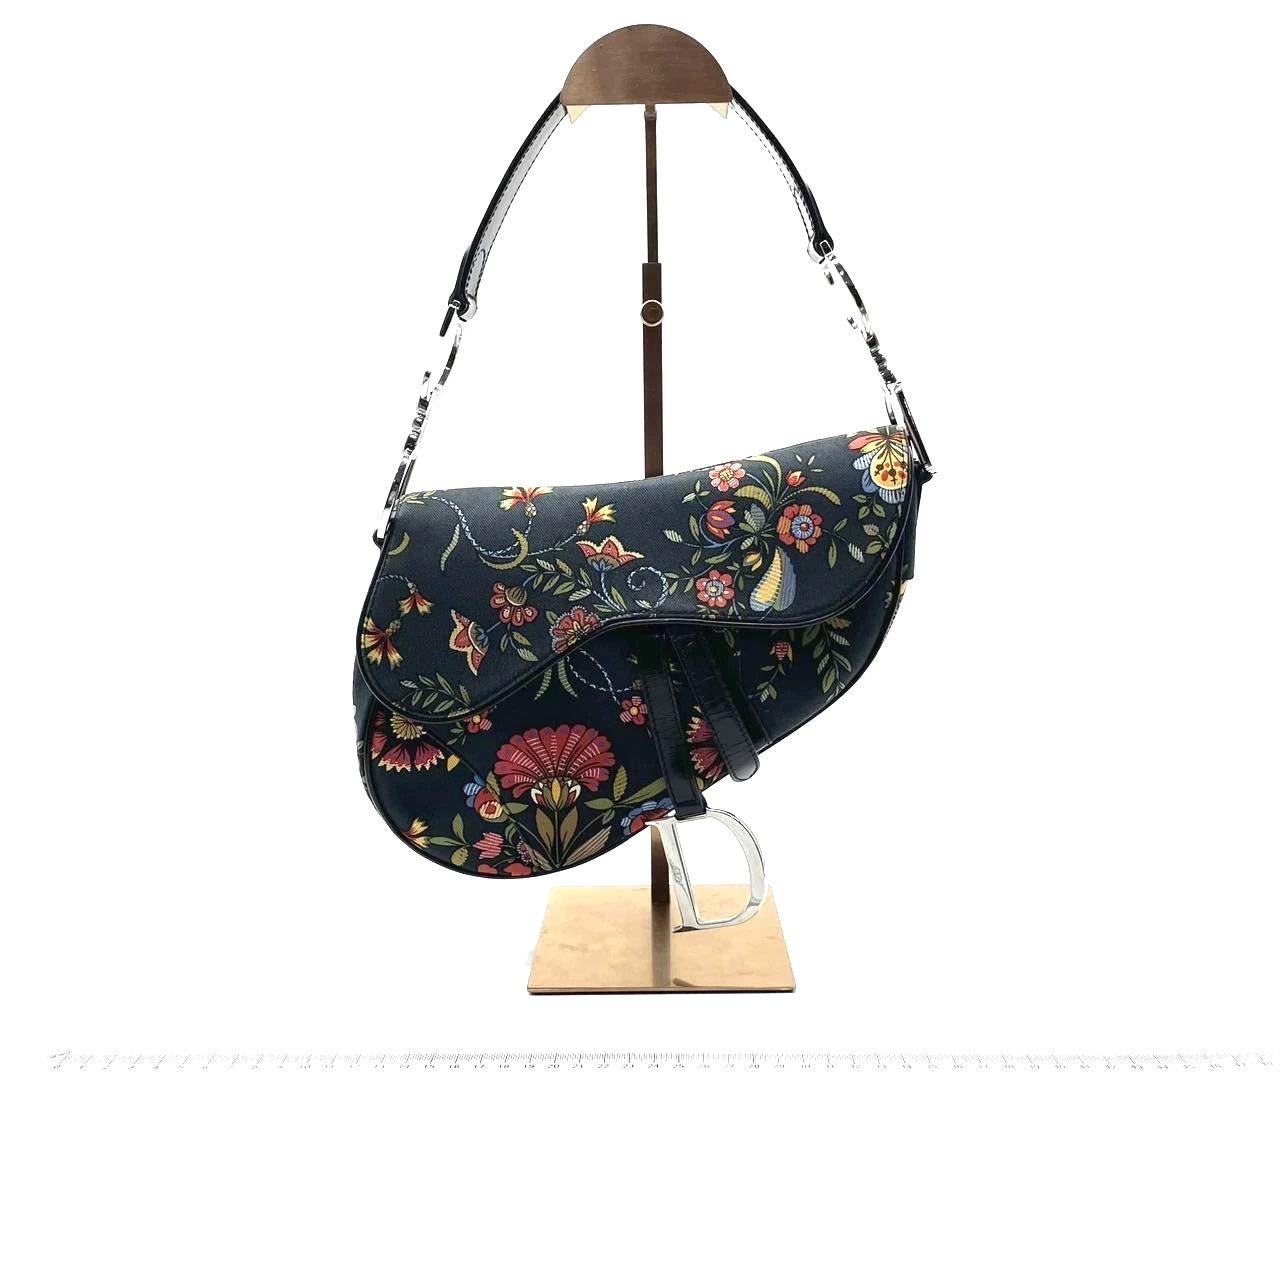 Dior Saddle Black Denim with Floral Embroidery John Galliano Design For Sale 2